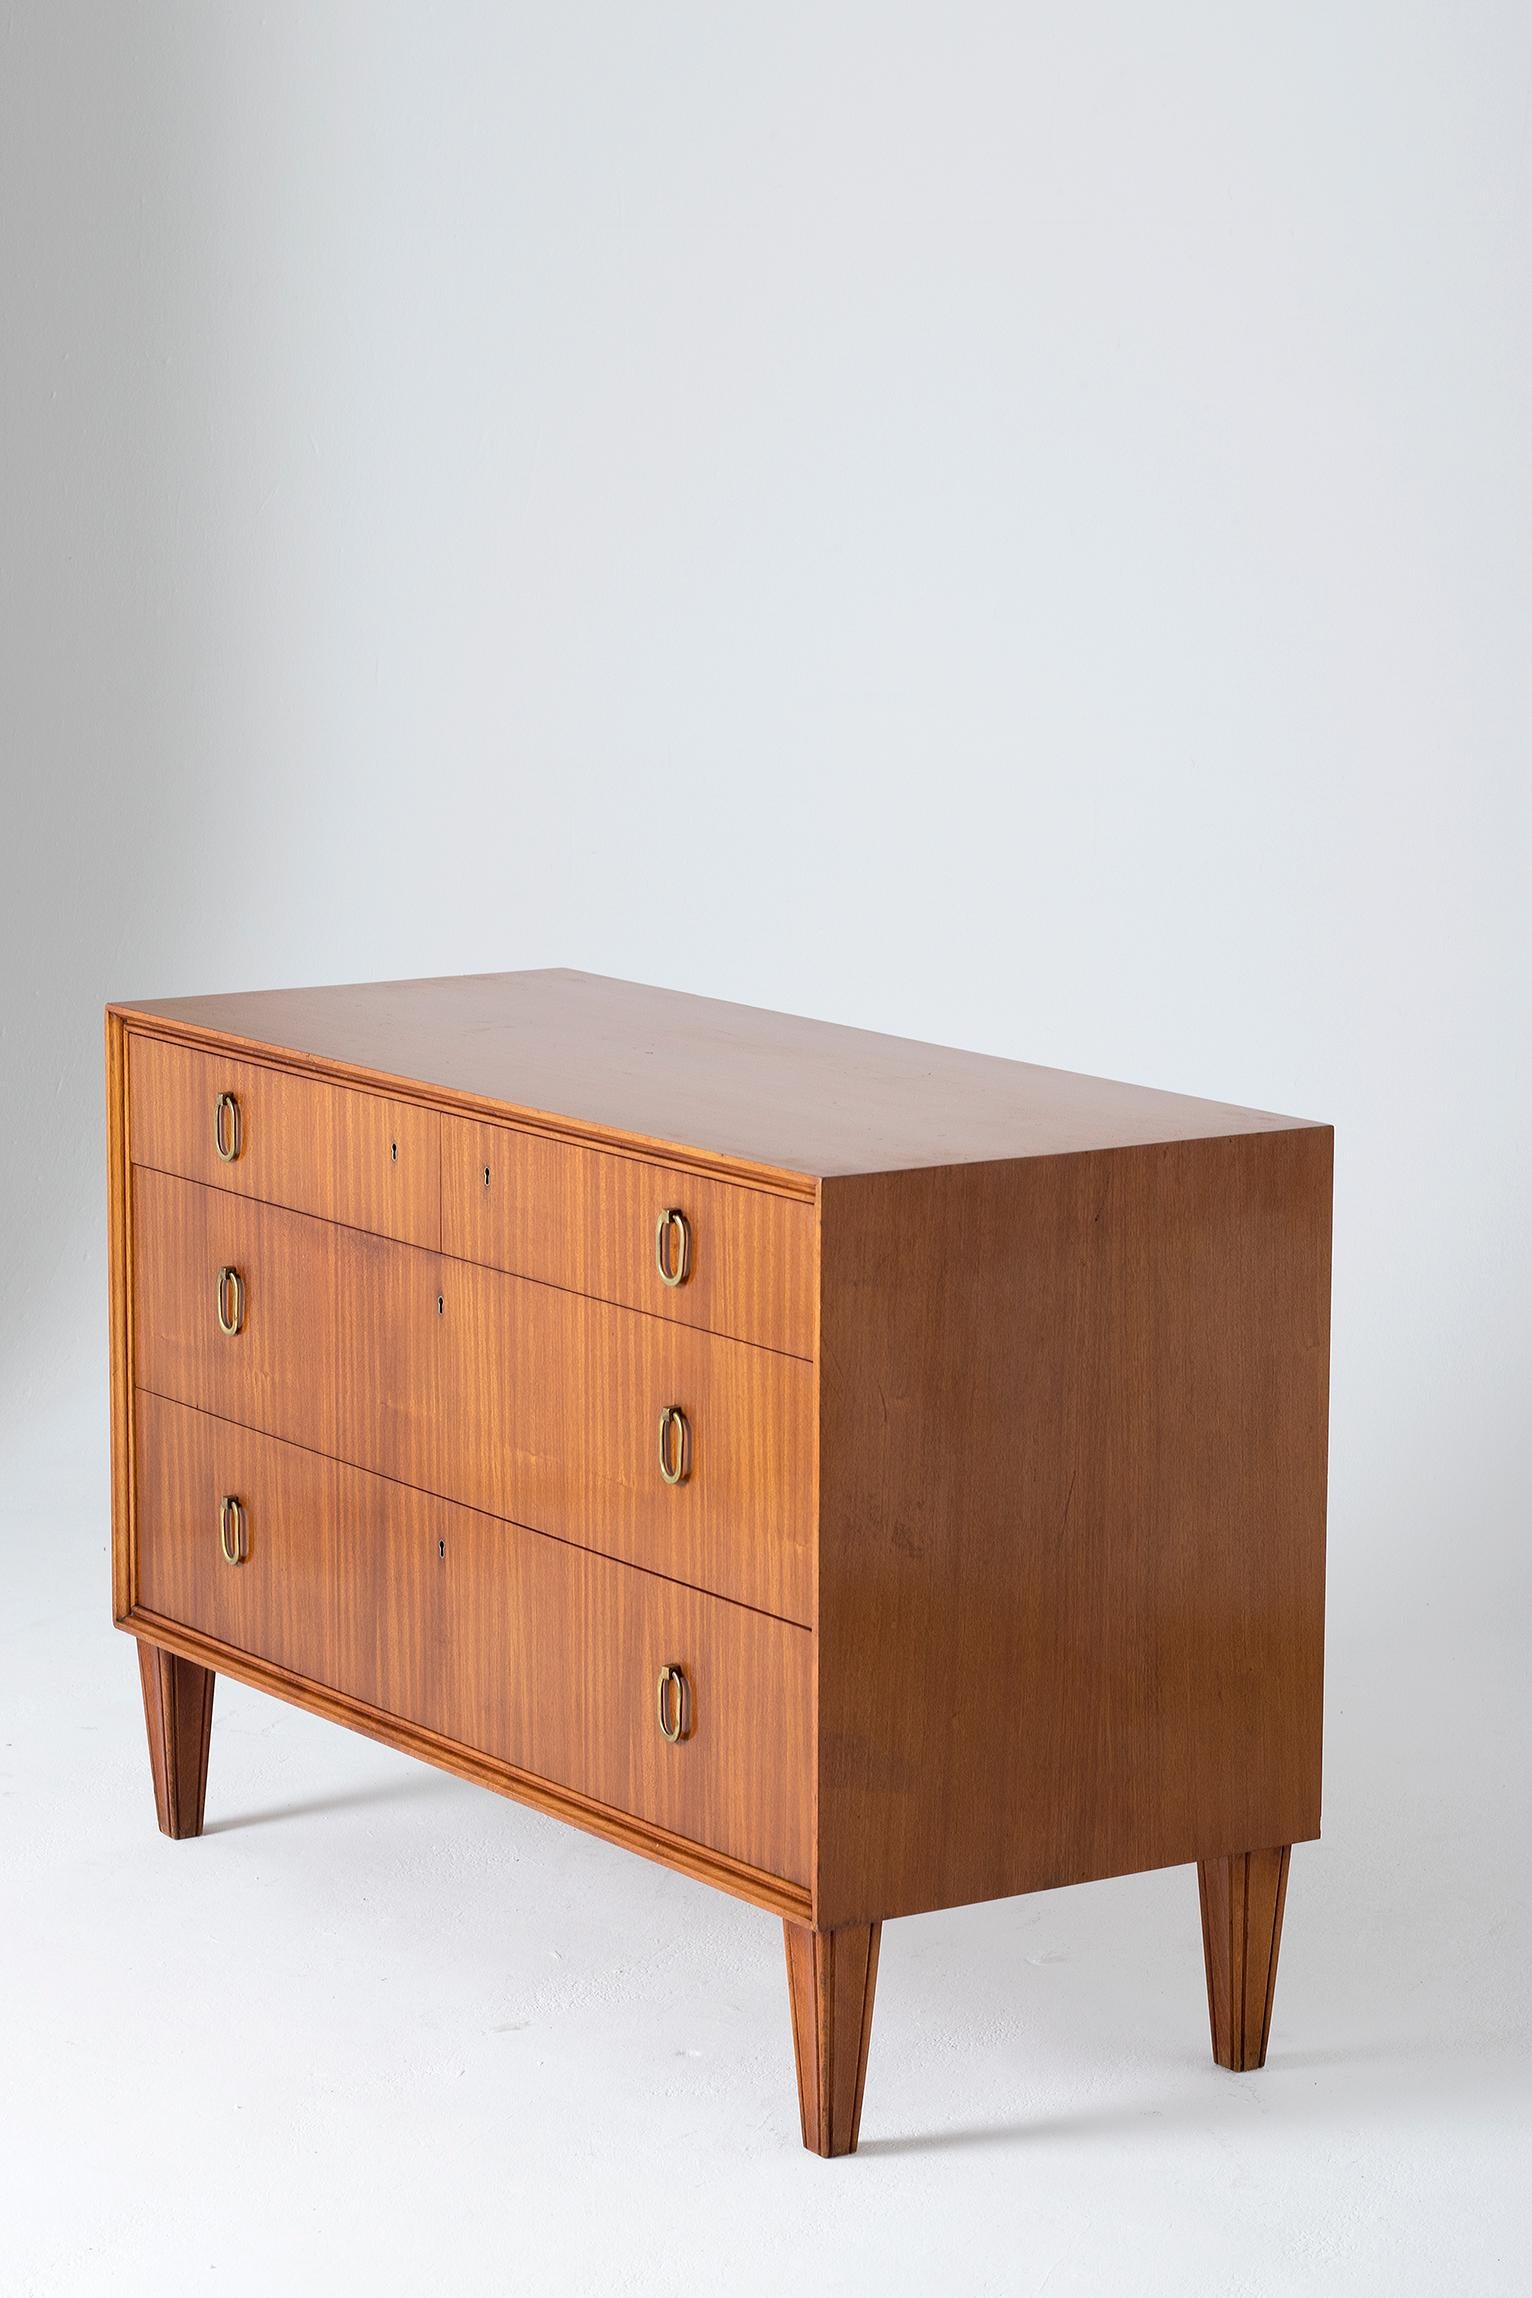 20th Century Midcentury Mahogany Chest of Drawers by Axel Larsson for Bodafors